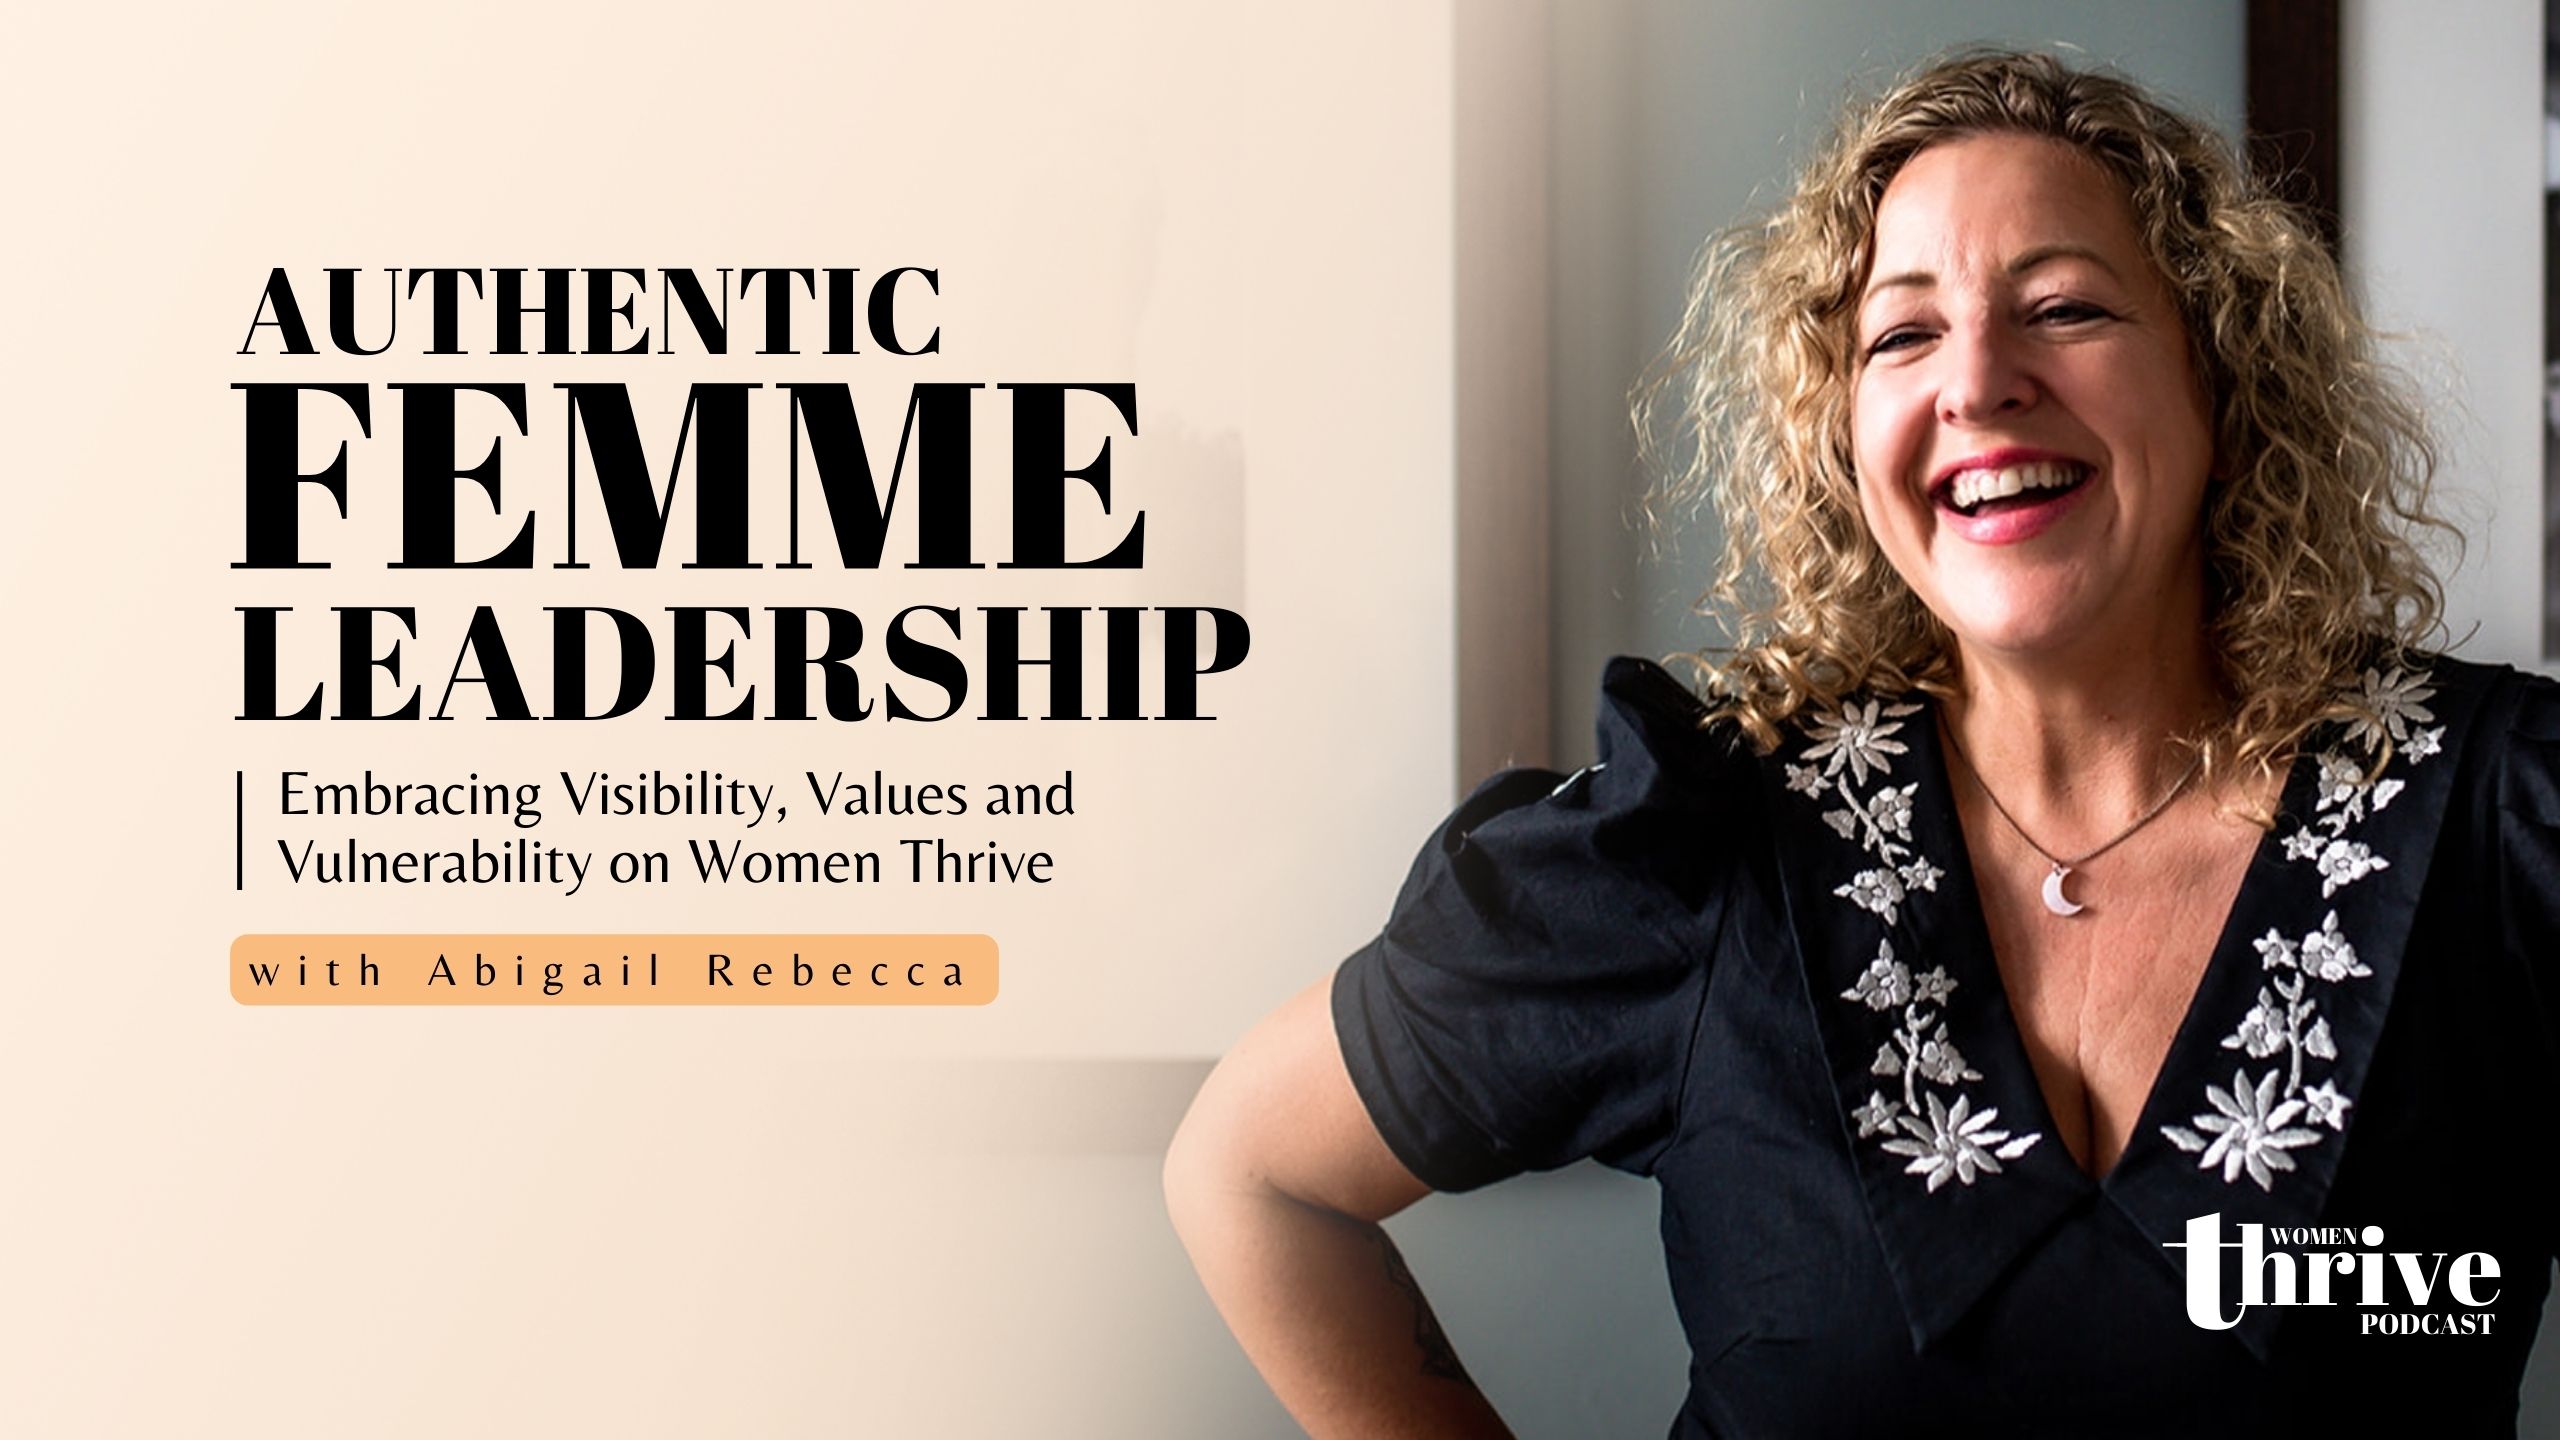 Authentic Femme Leadership: Embracing Visibility, Values and Vulnerability with Abigail Rebecca